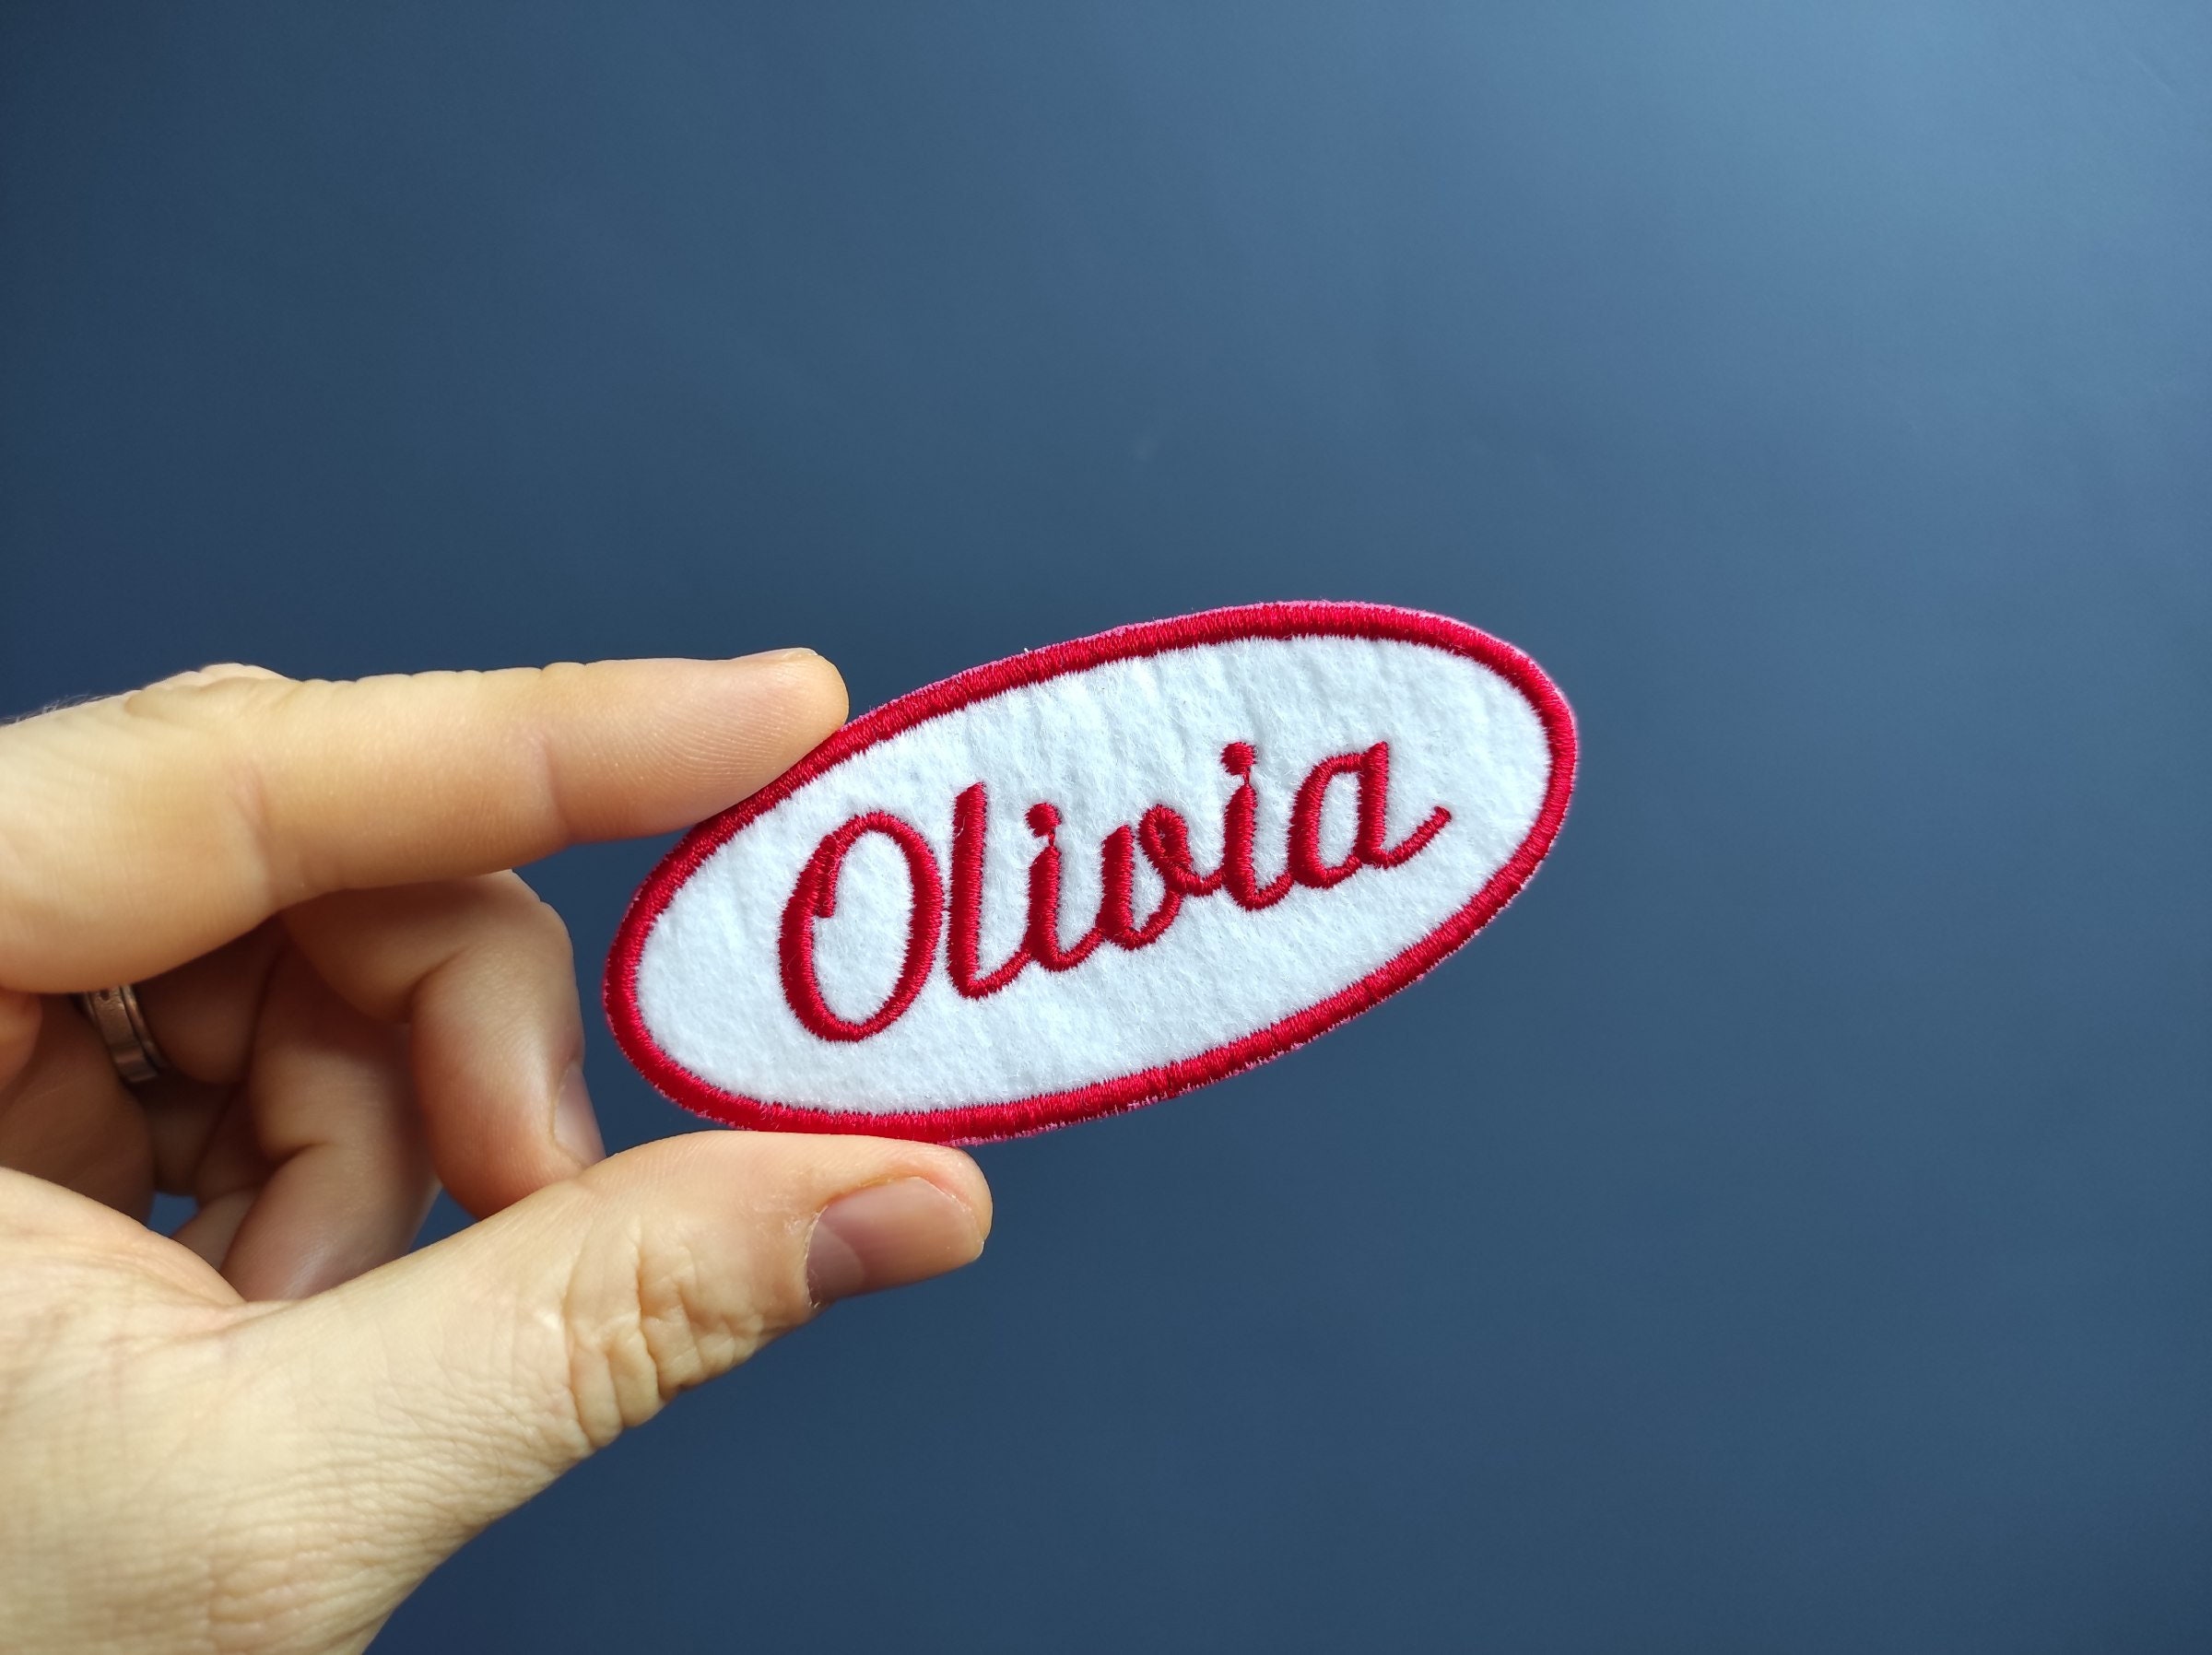 Retro Embroidered Name Patch, Vintage Style Name Patch, Custom